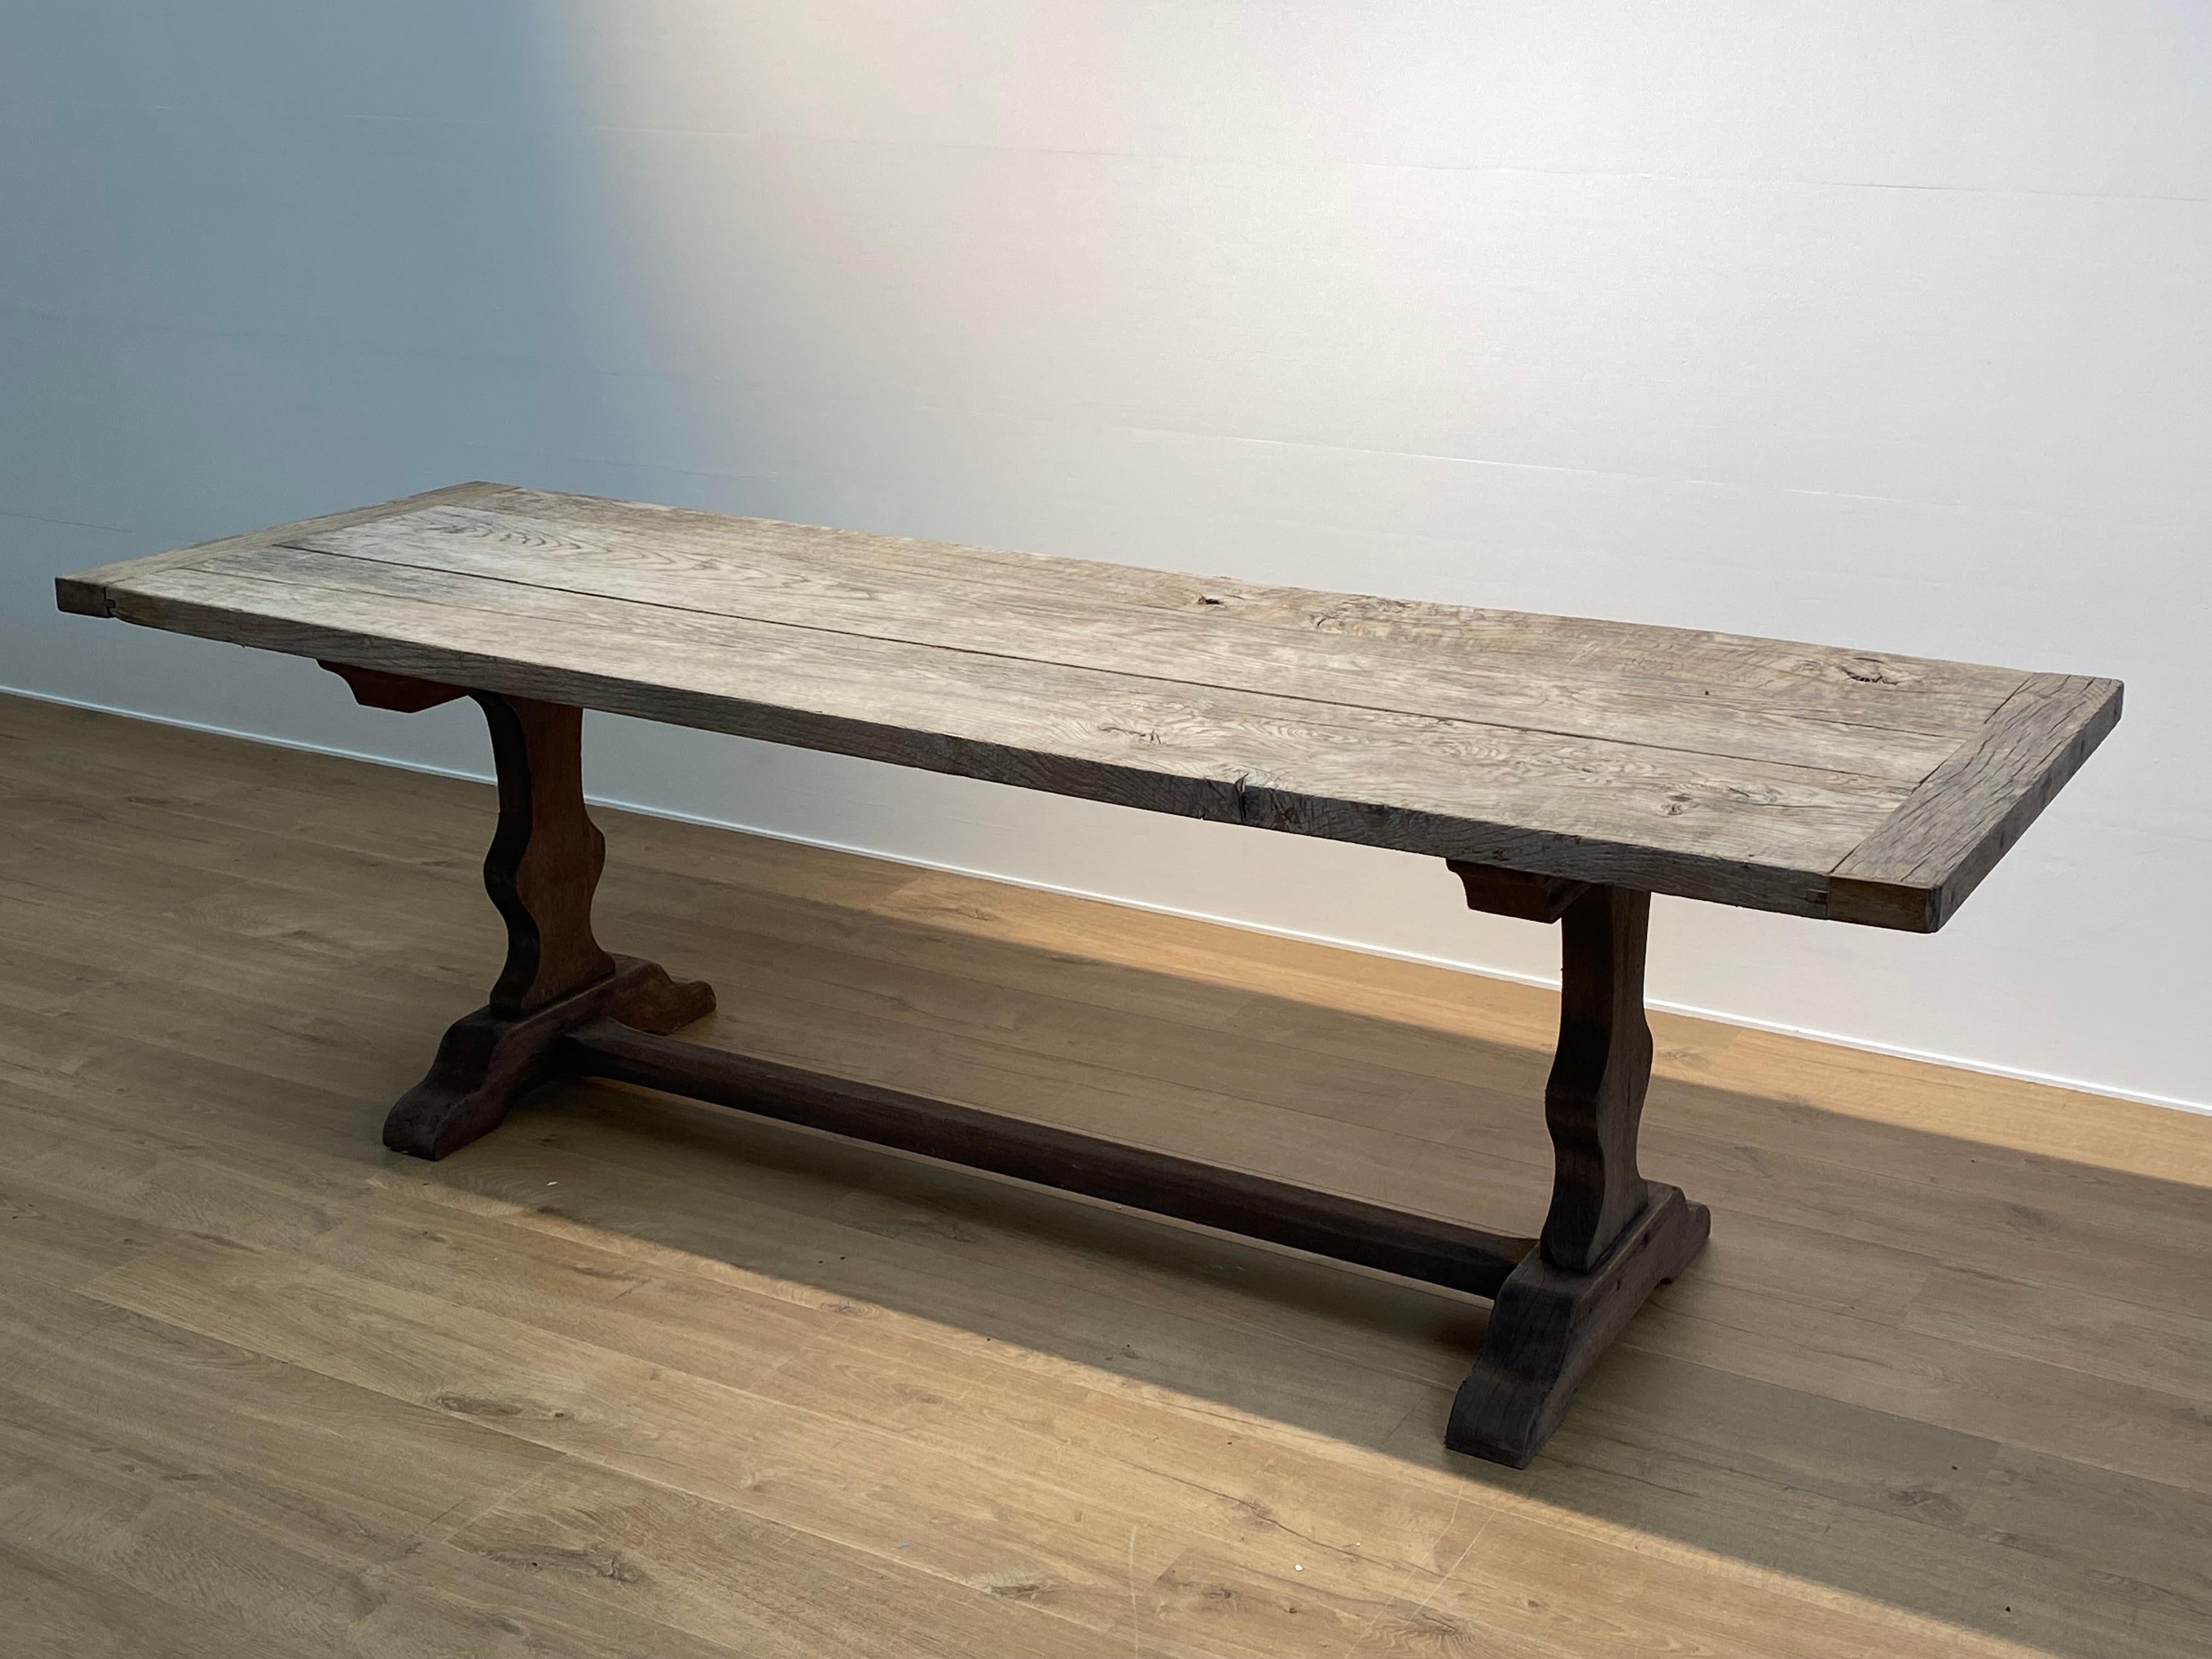 Elegant French Farmers Table with an old Oak Table Top with 
a nice and warm bleached patina,
the base of the table ,two trestles, are made of Meranti wood,
very comfortable table to be used as a dining table or as a desk or 
as a console,
the table